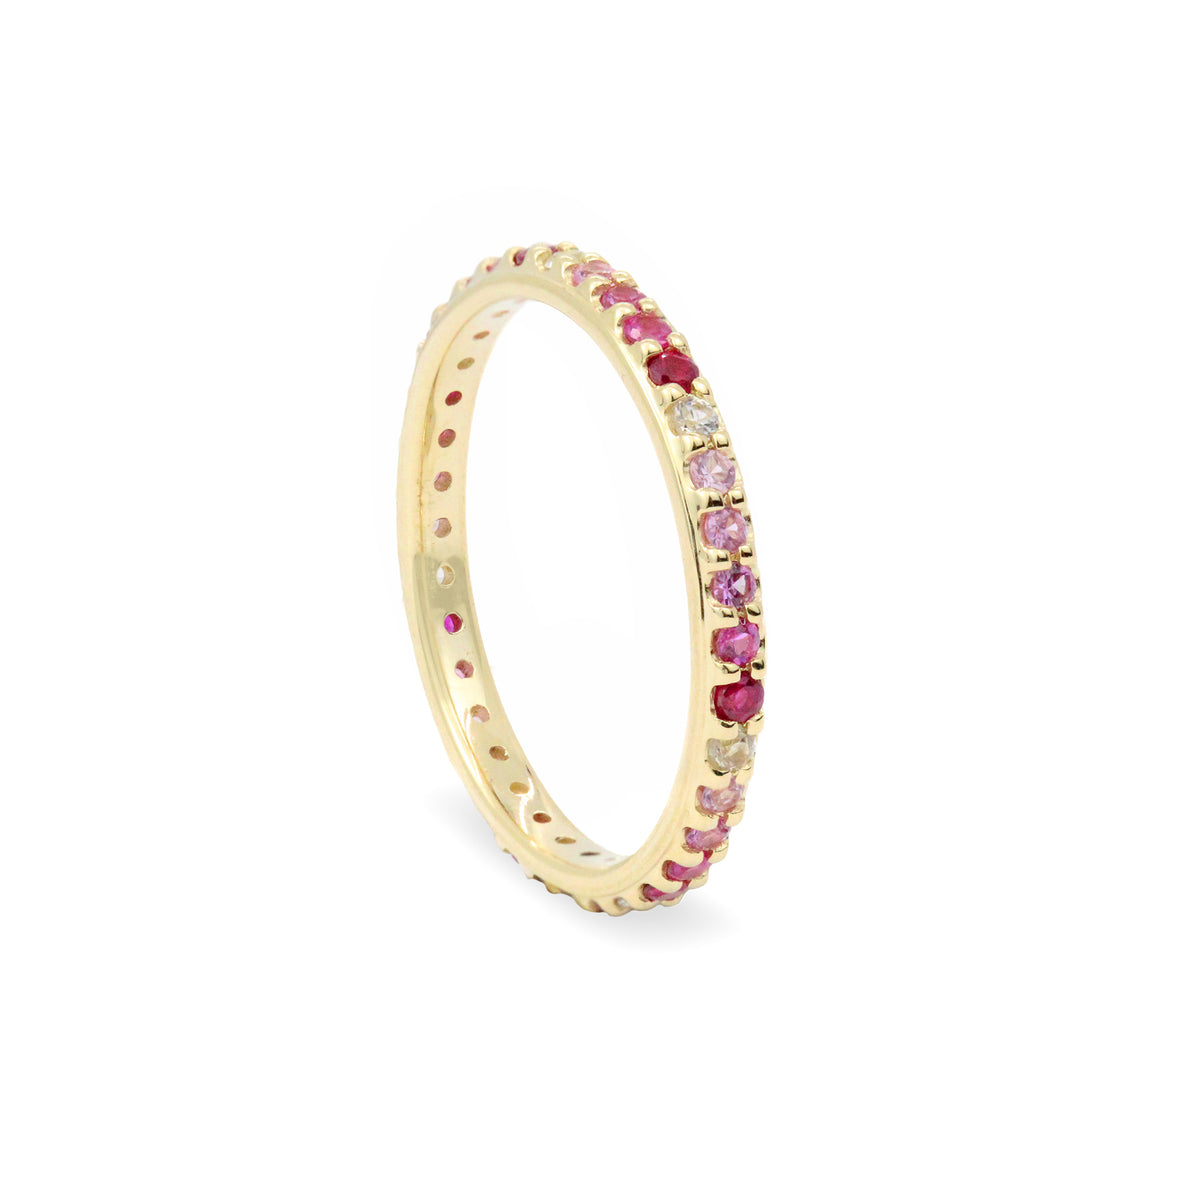 Multi Colored 14K Gold Eternity Band